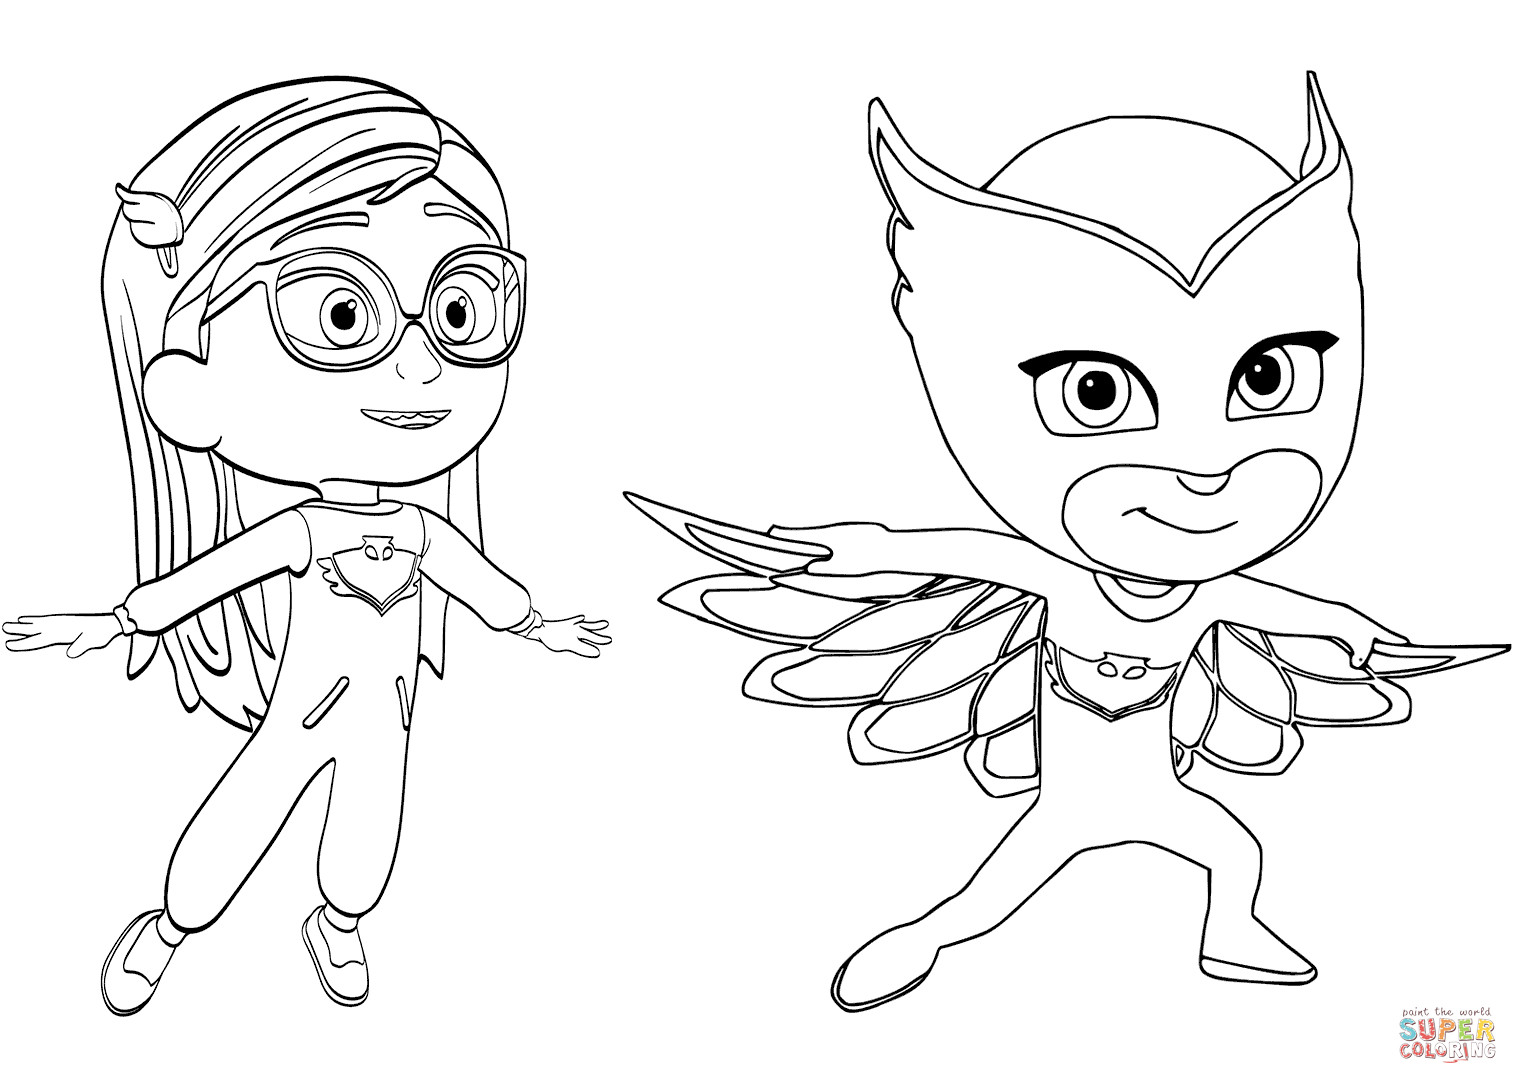 Pj Masks Coloring Pages To Print
 Pajama Hero Amaya is Owlette from PJ Masks coloring page